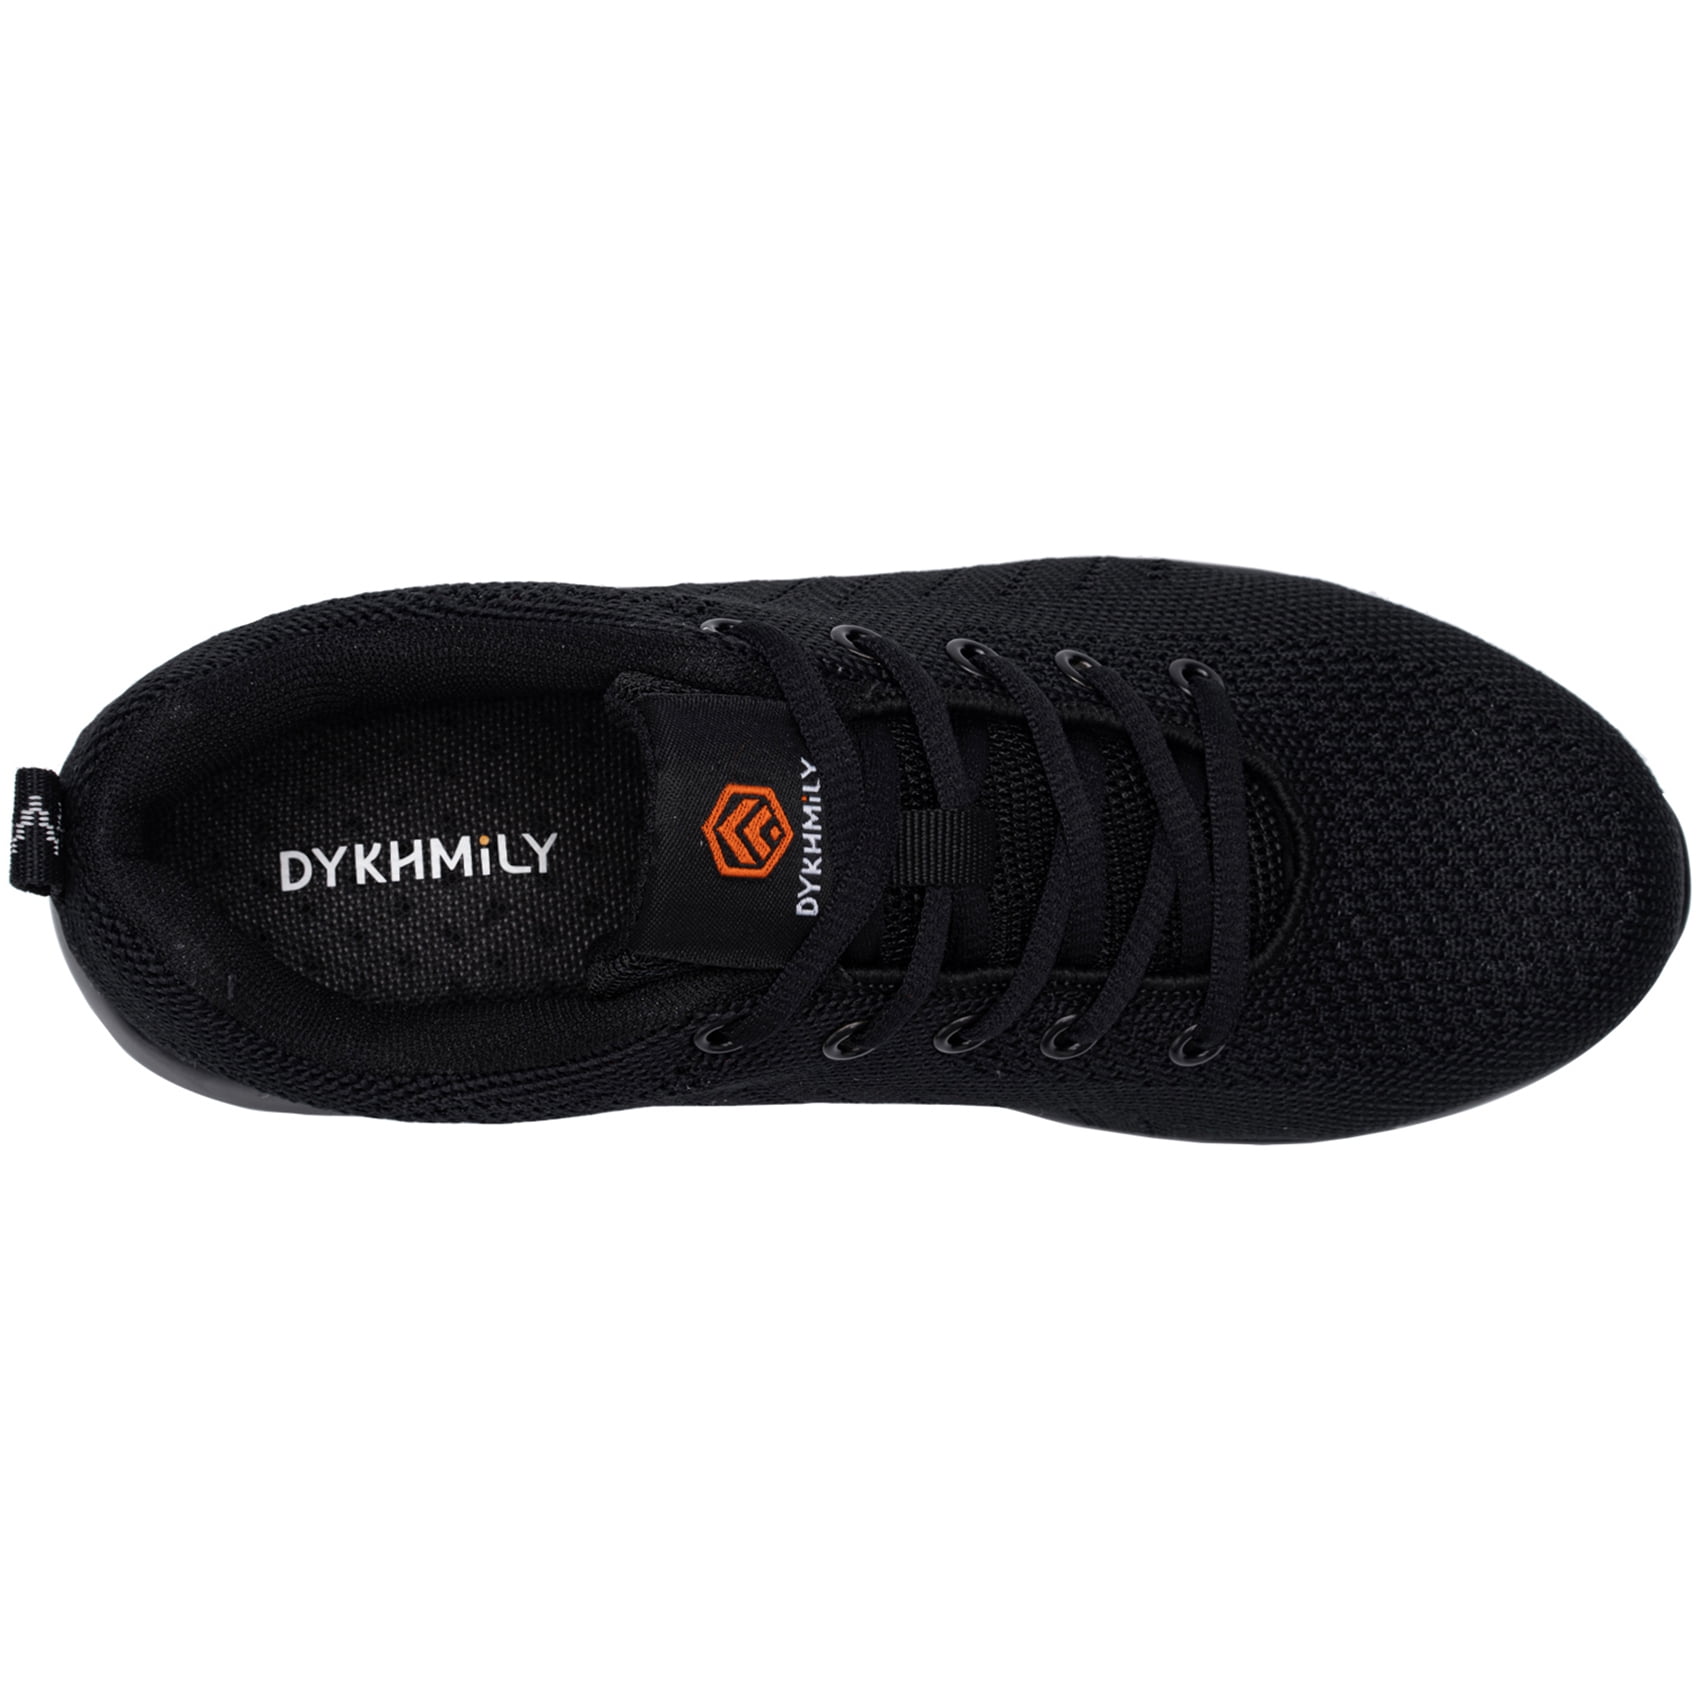 DYKHMILY Steel Toe Shoes for Women Cushion Lightweight Work Shoes Slip Resistant Breathable Safety Running Shoes D813 